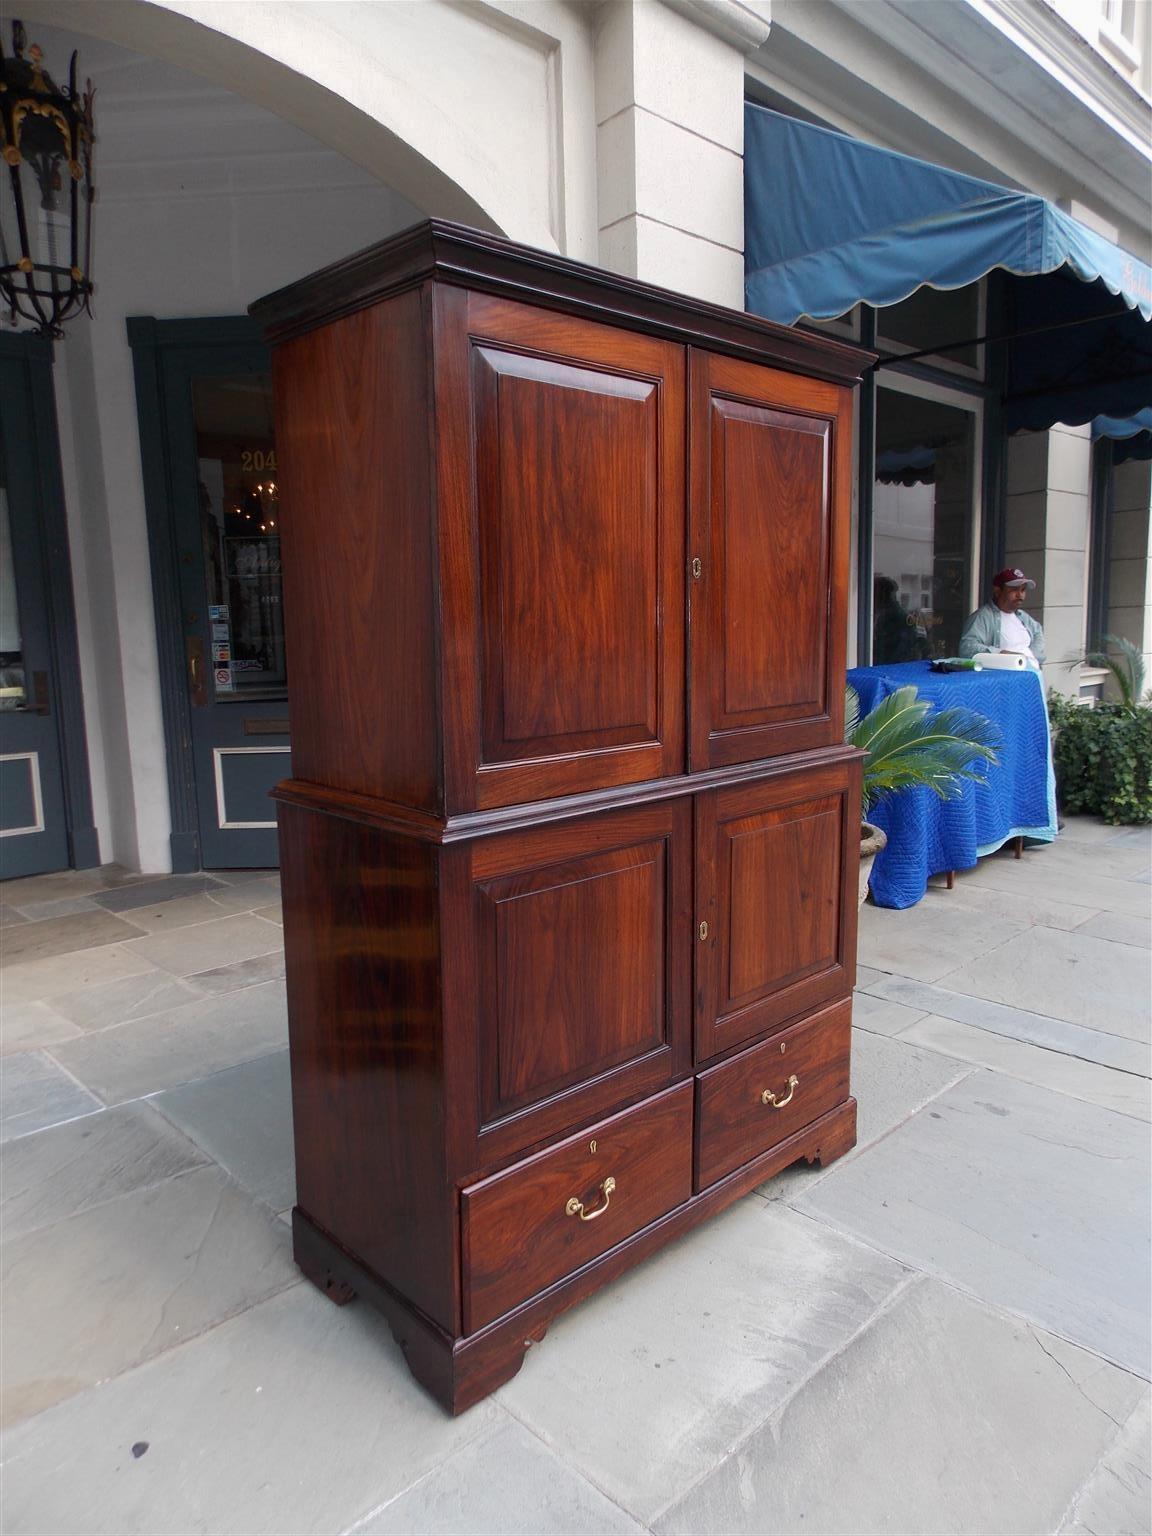 Caribbean Zebra wood gentleman's linen press with a carved molded edge cornice, two upper beveled paneled hinged doors revealing two adjustable interior shelves, two lower beveled hinged doors revealing two fitted interior drawers, flanking lower